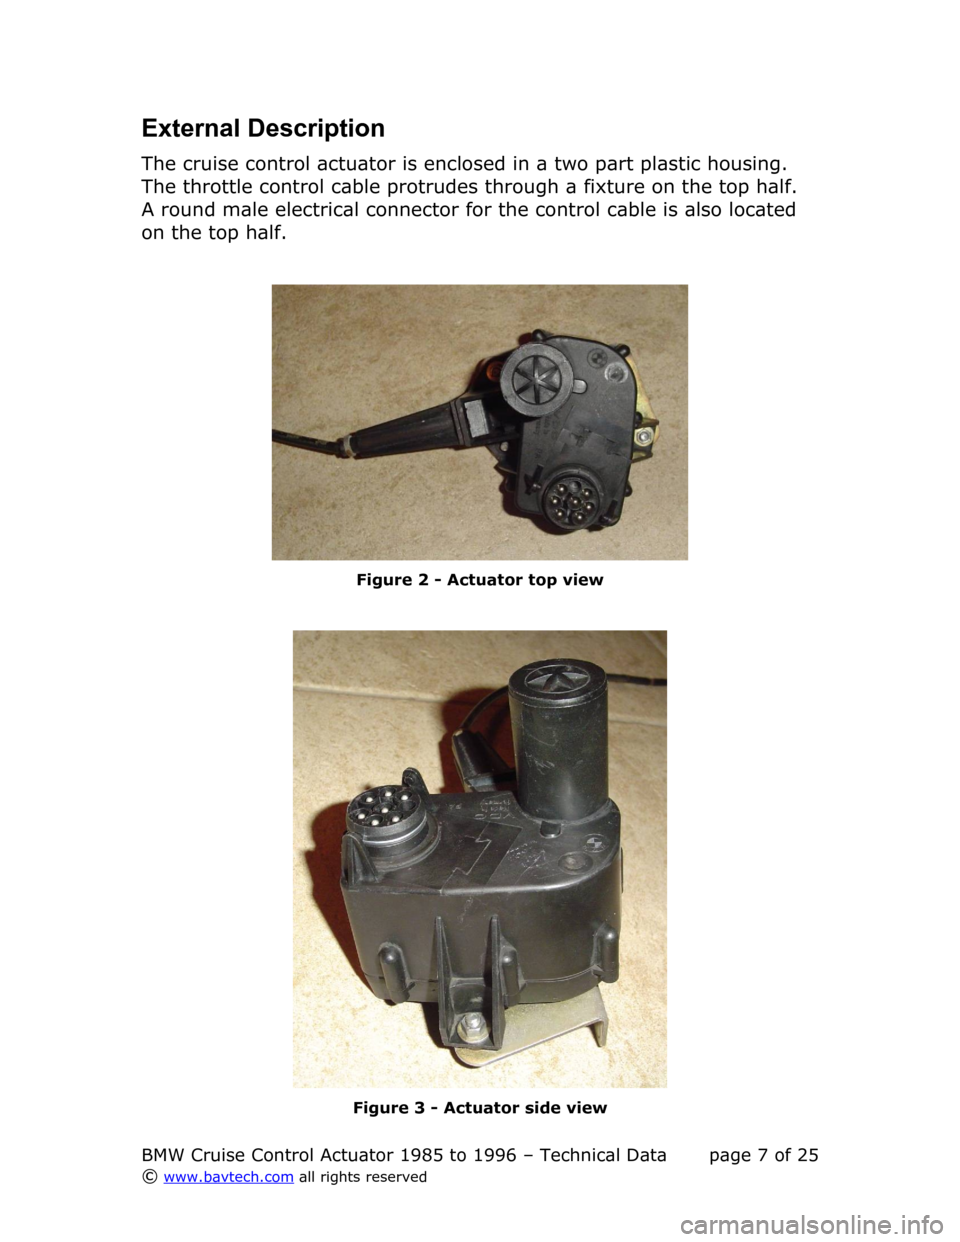 BMW 3 SERIES 1991 E36 Cruise Control Acutator External Description
The cruise control actuator is enclosed in a two part plastic housing.  
The throttle control cable protrudes through a fixture on the top half.  
A round male electrical connecto